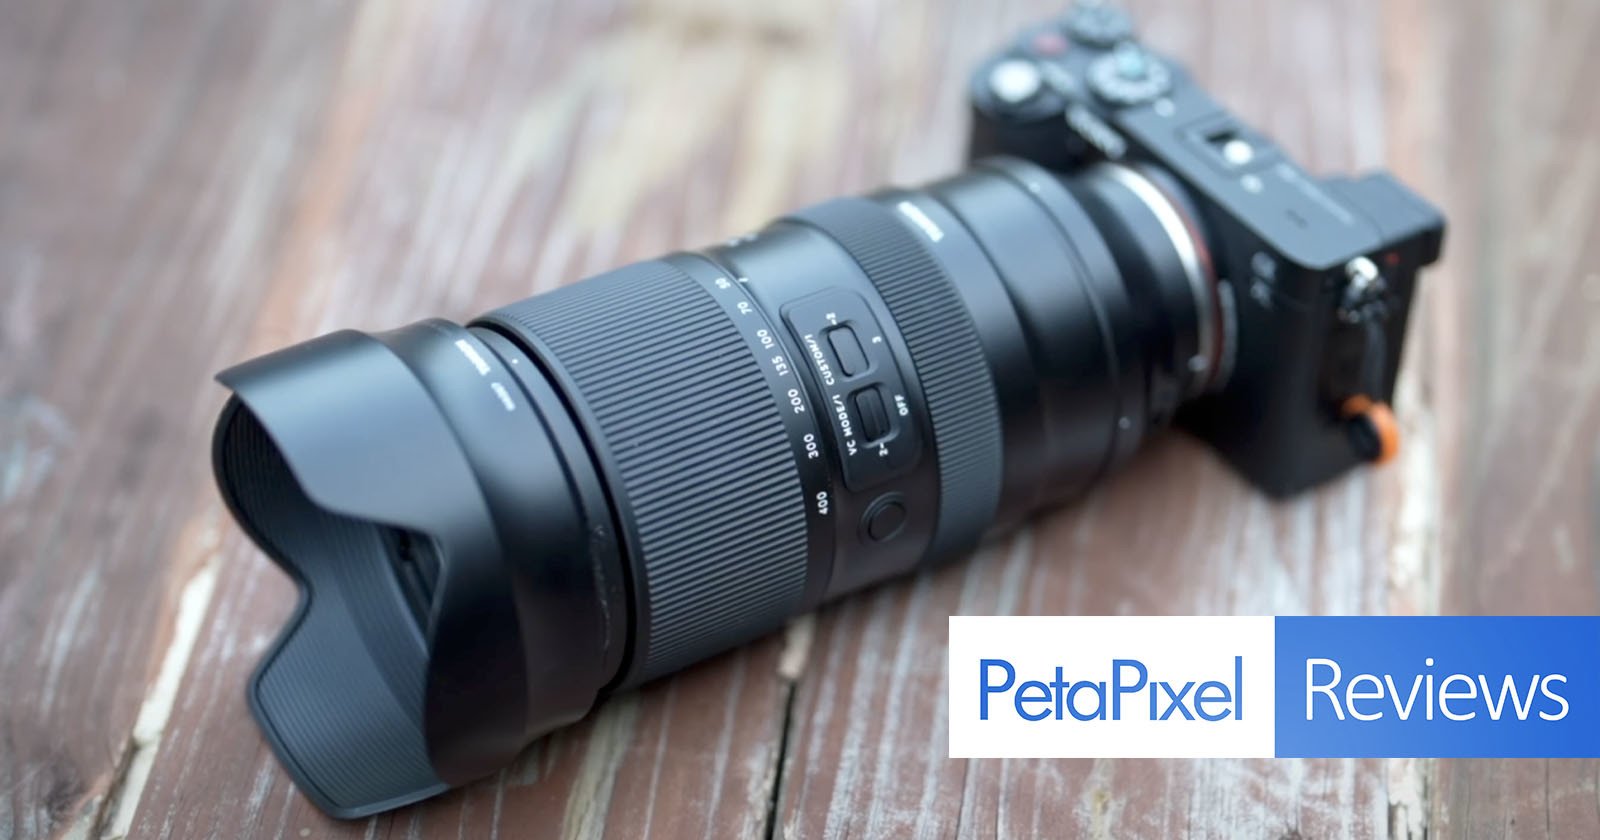 Tamron 50-400mm f/4.5-6.3 Di III Review: Not Your Average All-In